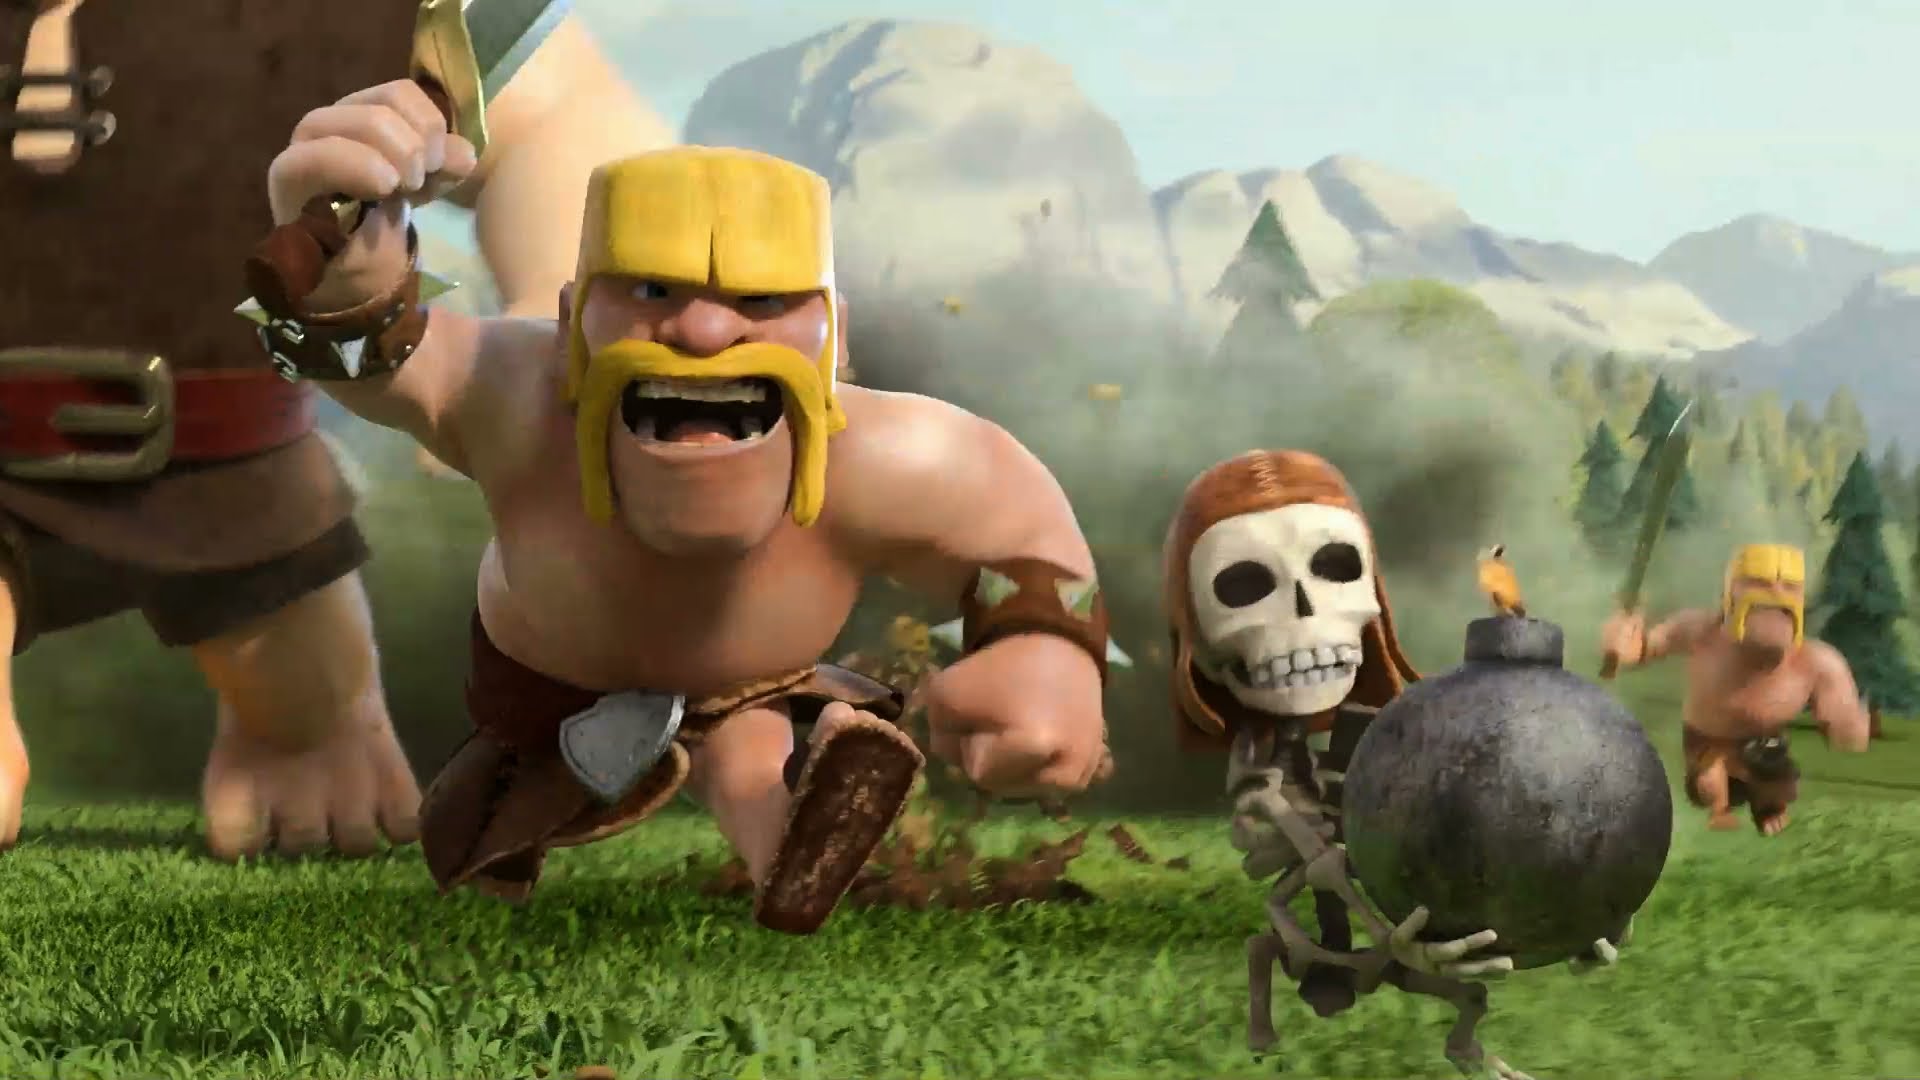 Clash Of Clans Adds New Hero Abilities & Gameplay Enhancements | Cult of Mac